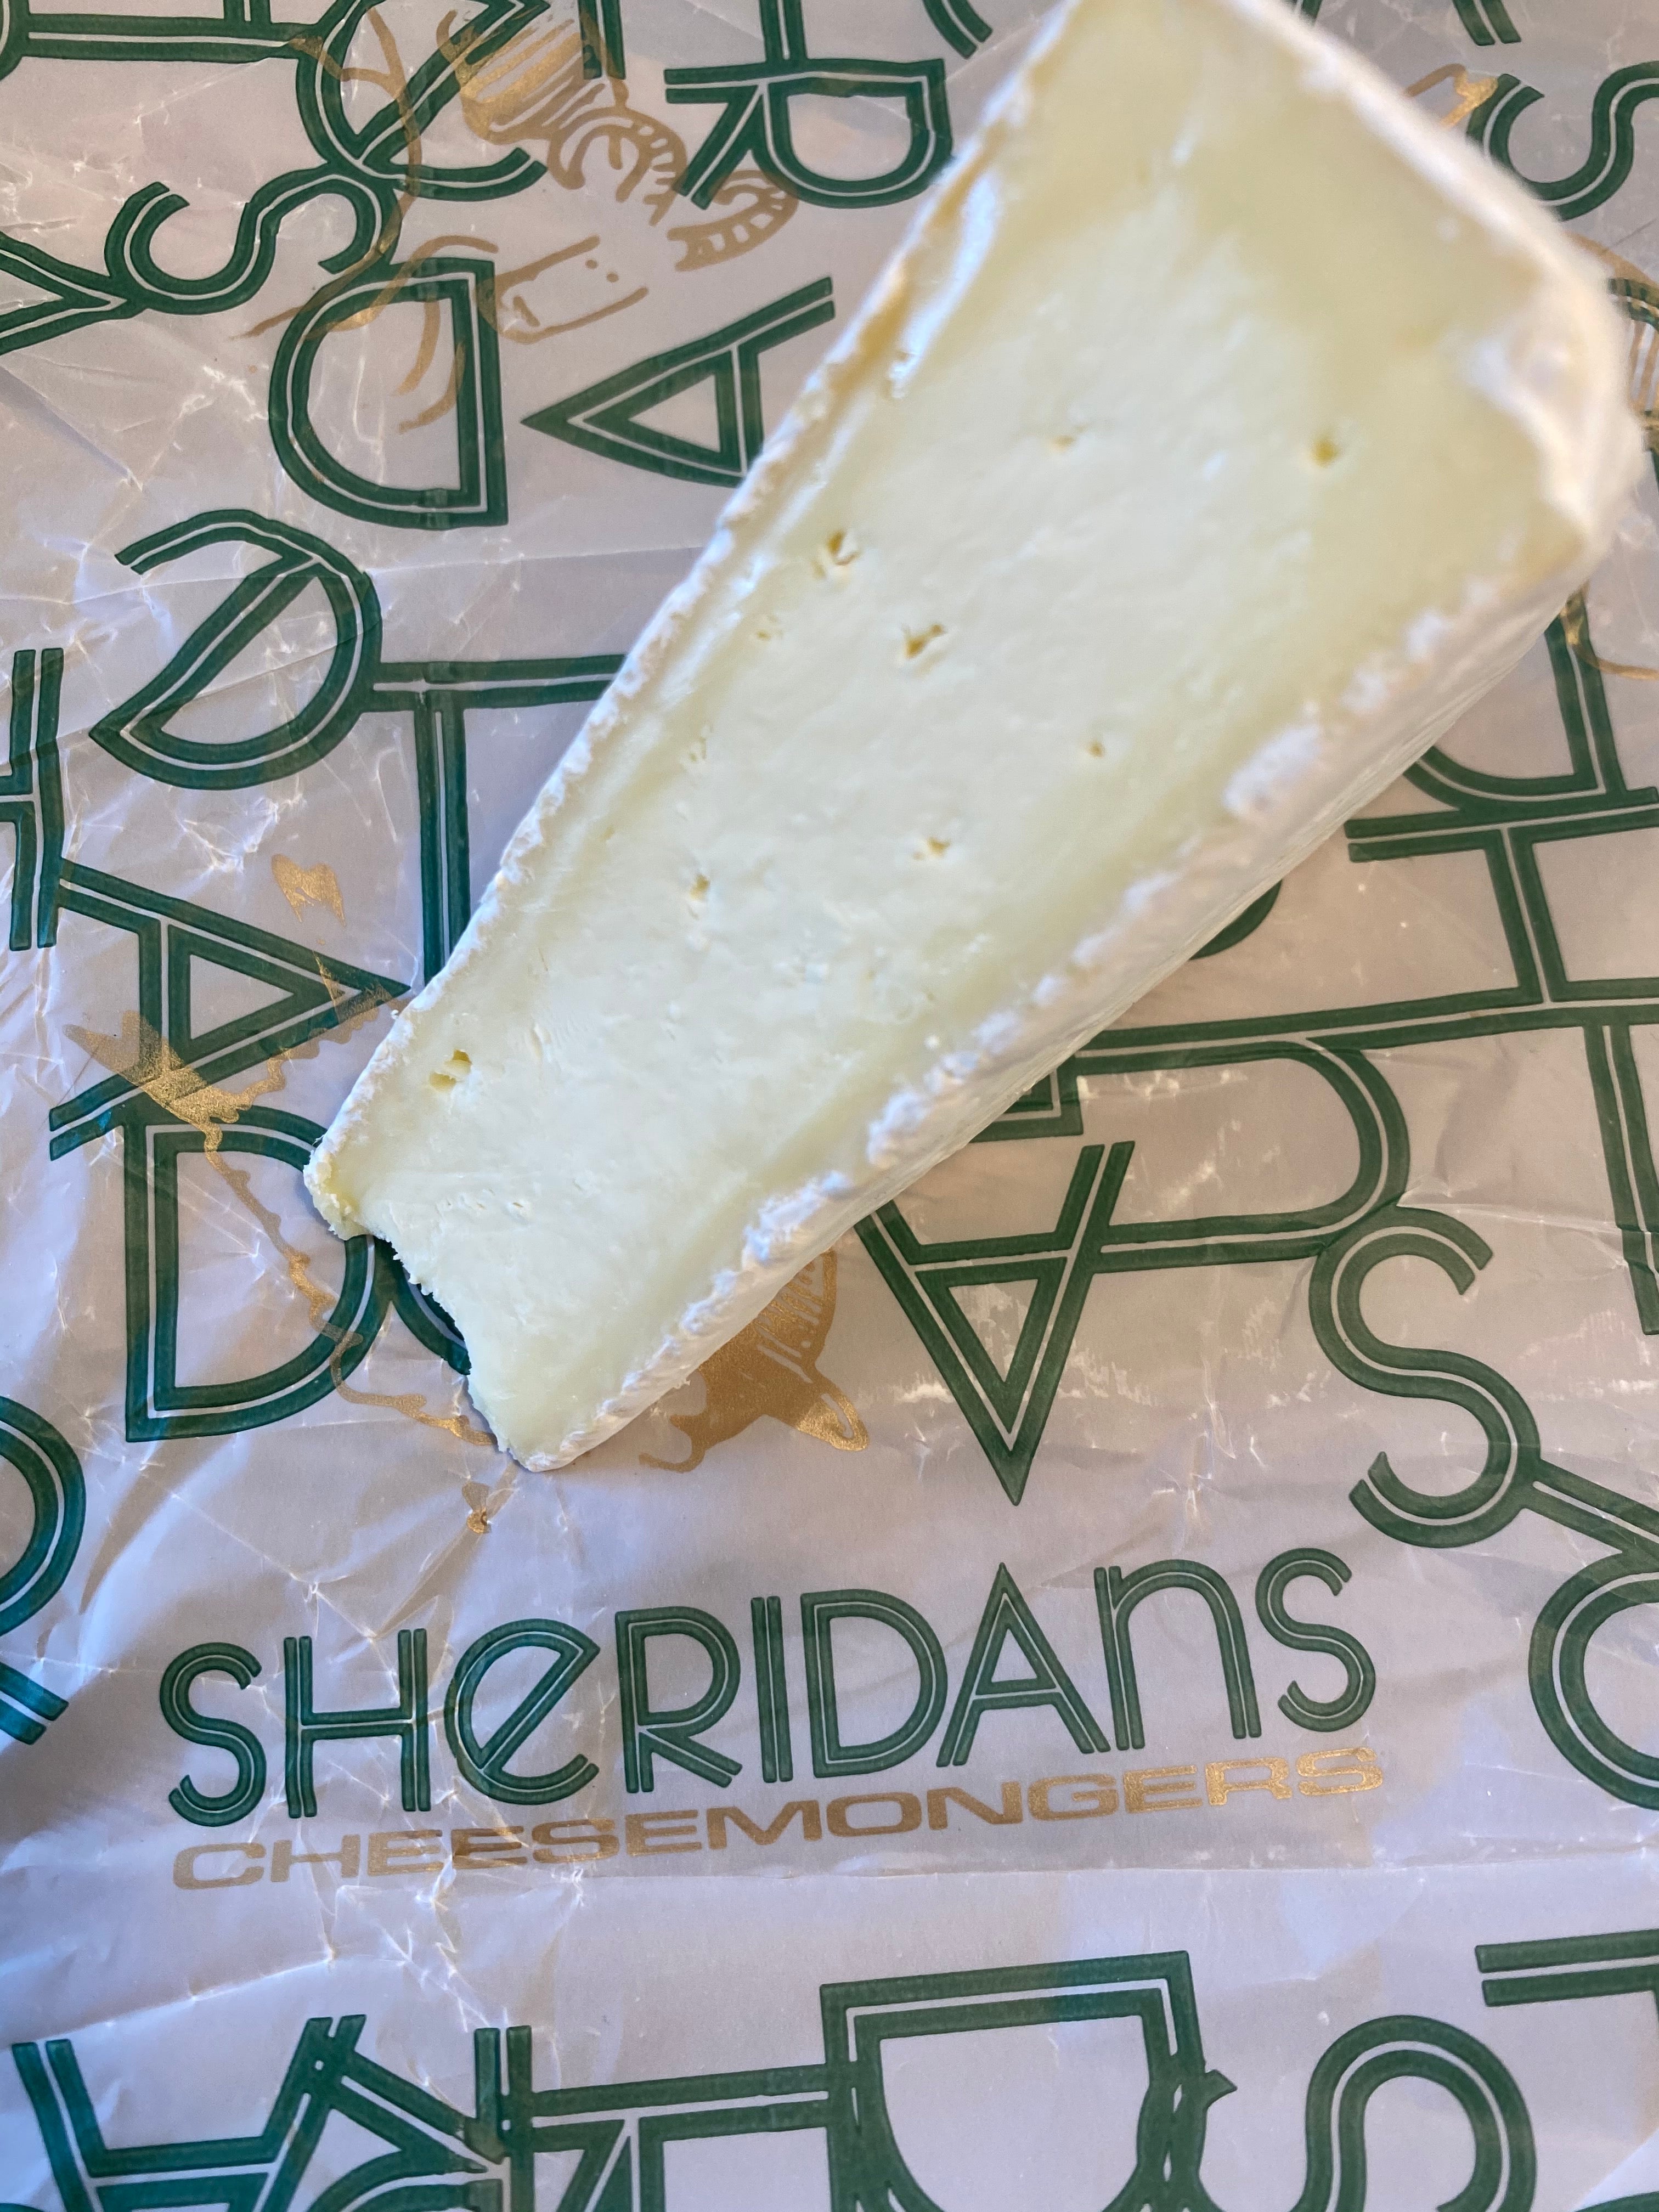 Wicklow Ban Brie